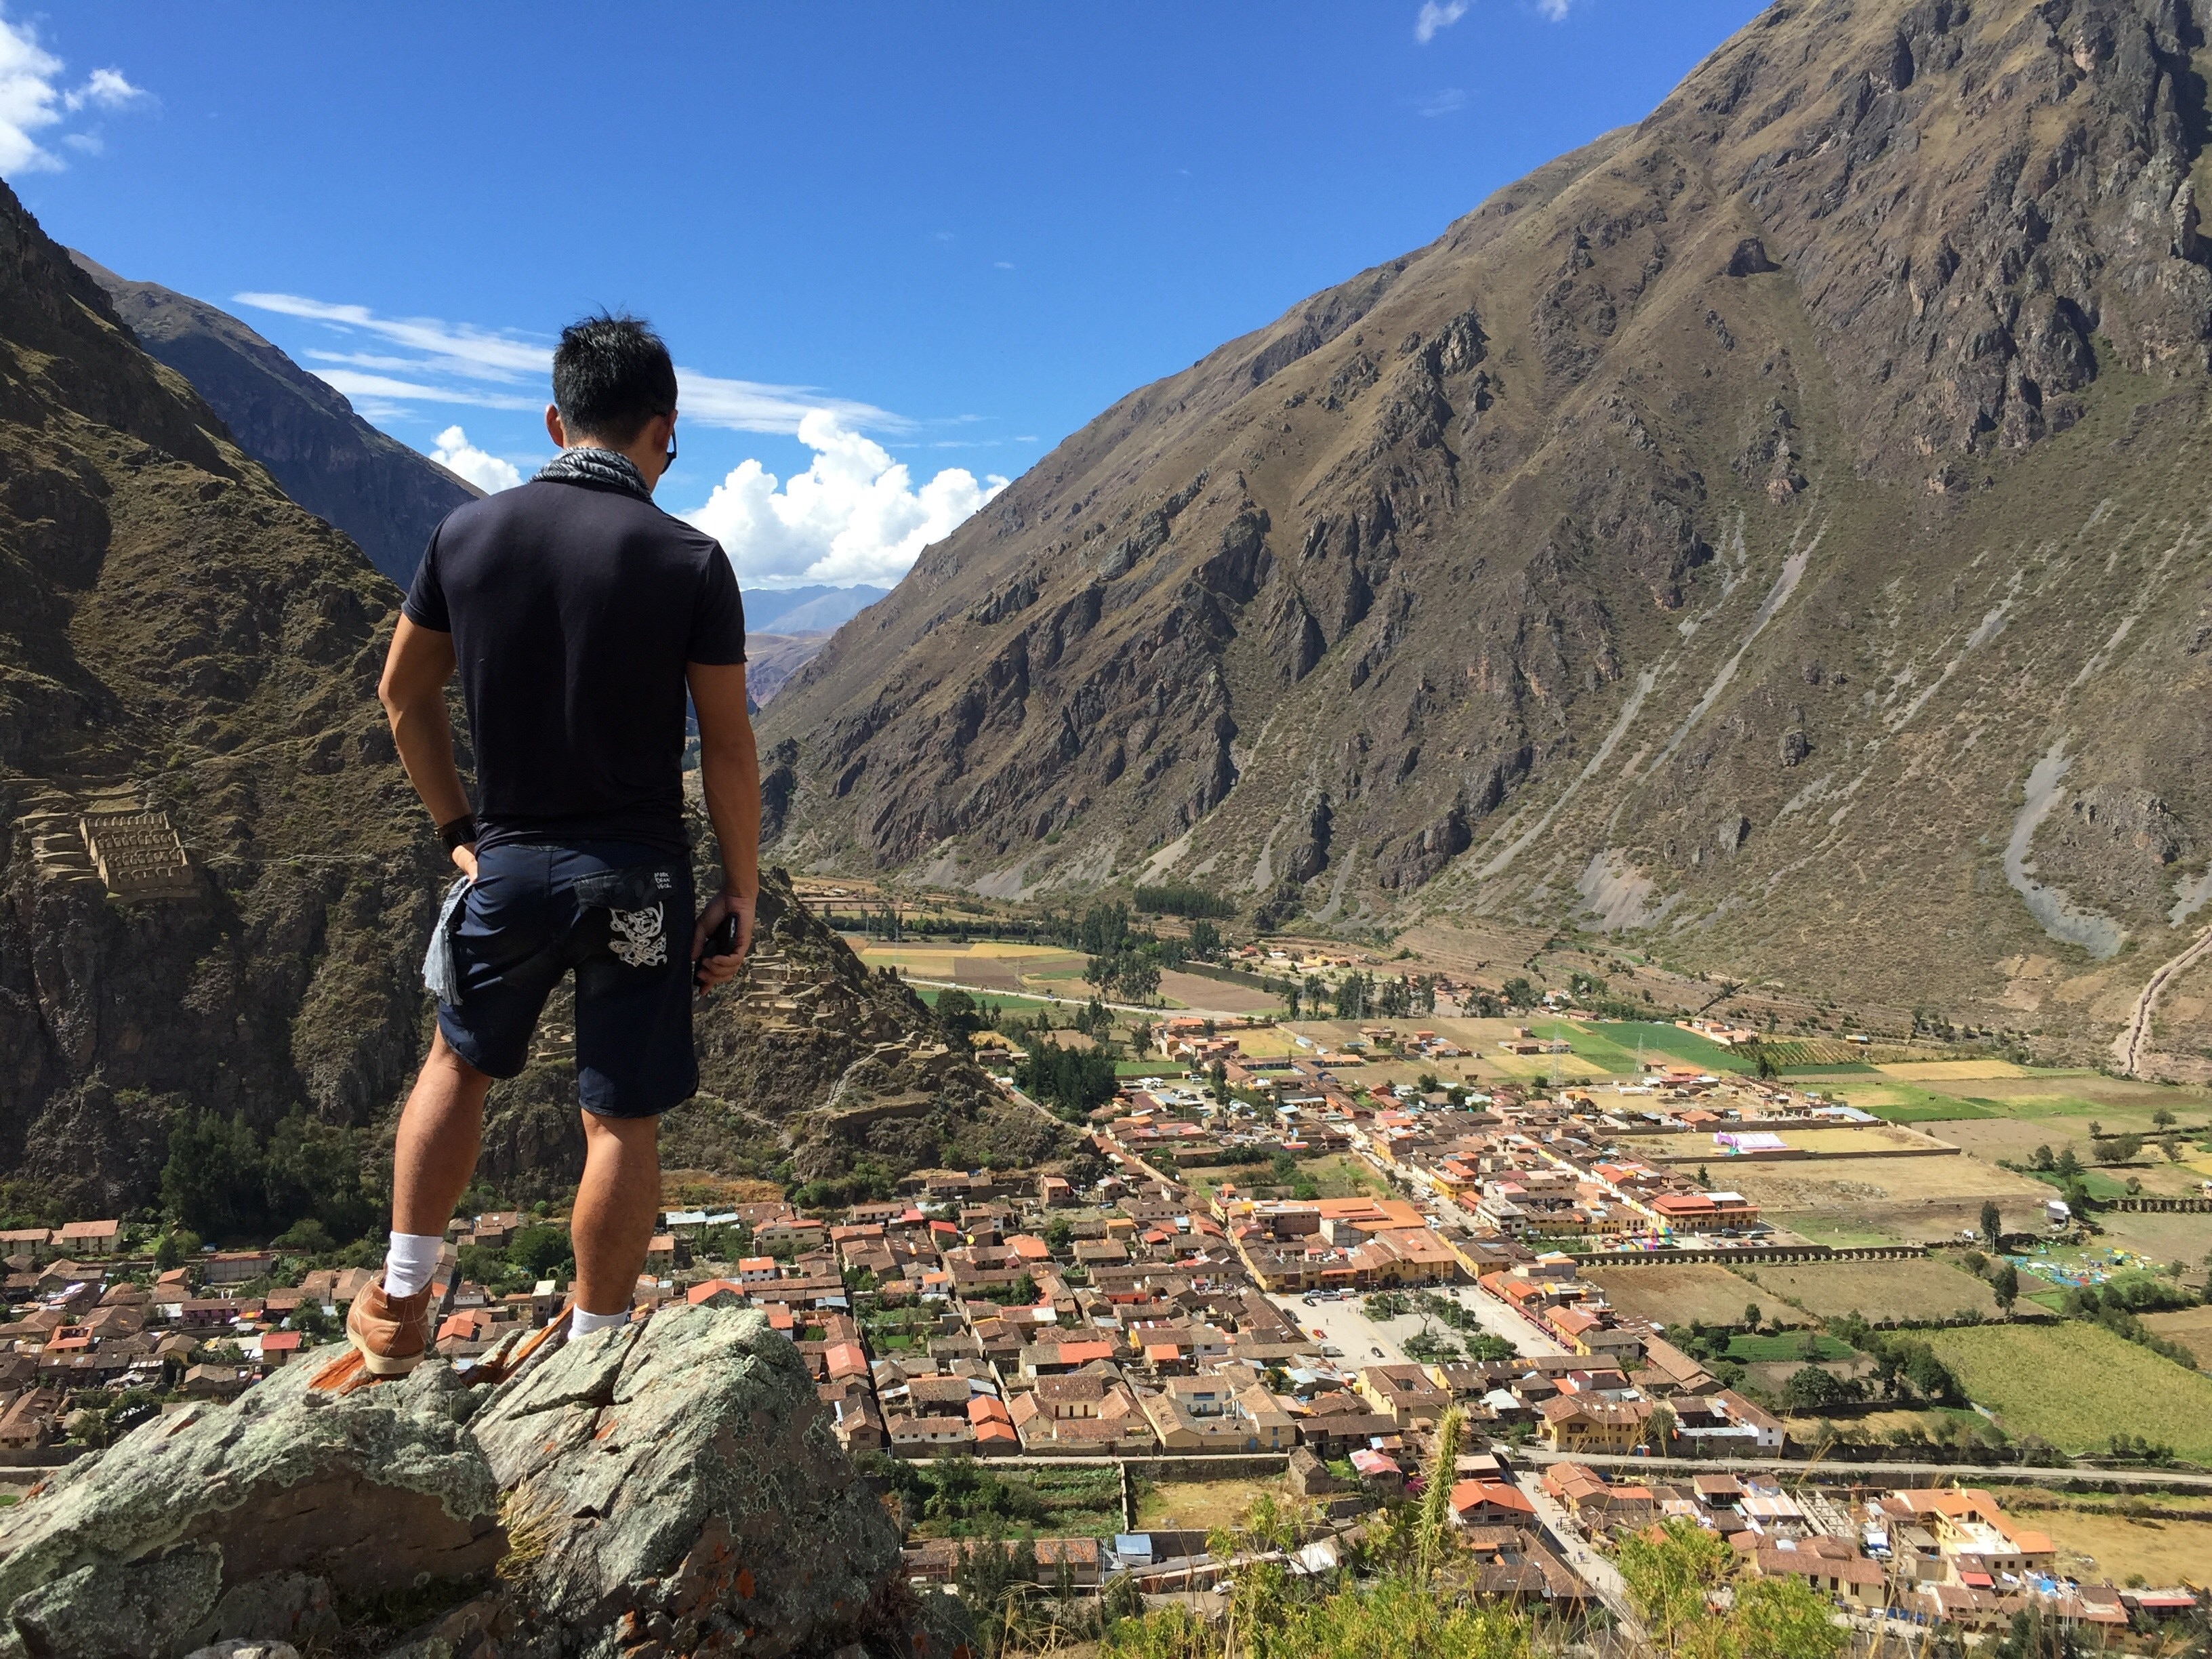 A majestic hike over the town of Ollantaytambo.